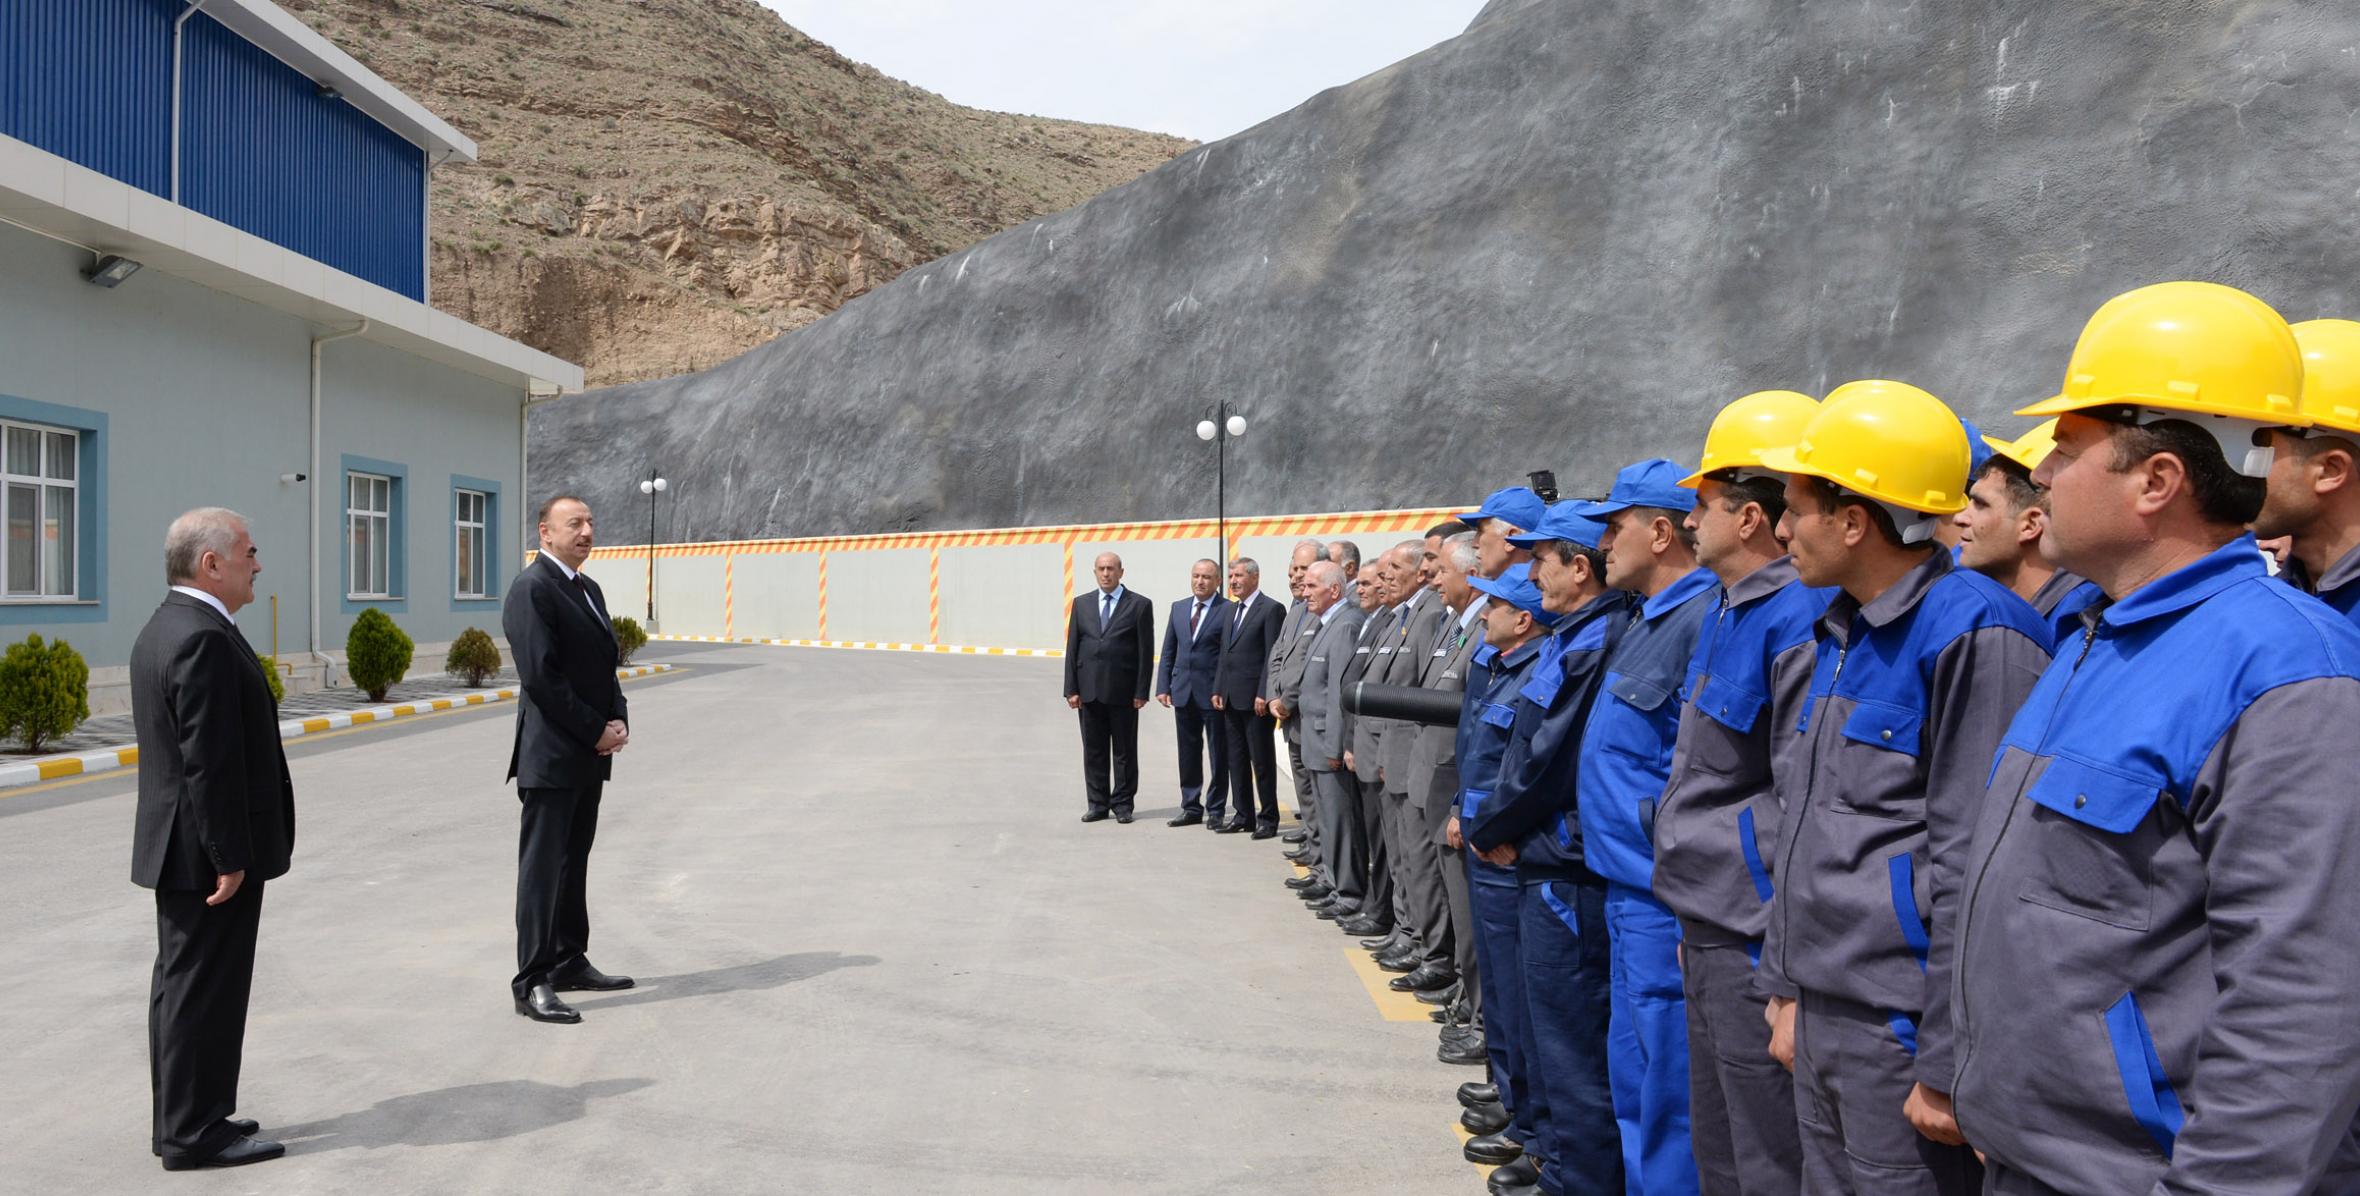 Speech by Ilham Aliyev at the opening of the Arpachay-1 and Arpachay-2 hydro-electric power plants